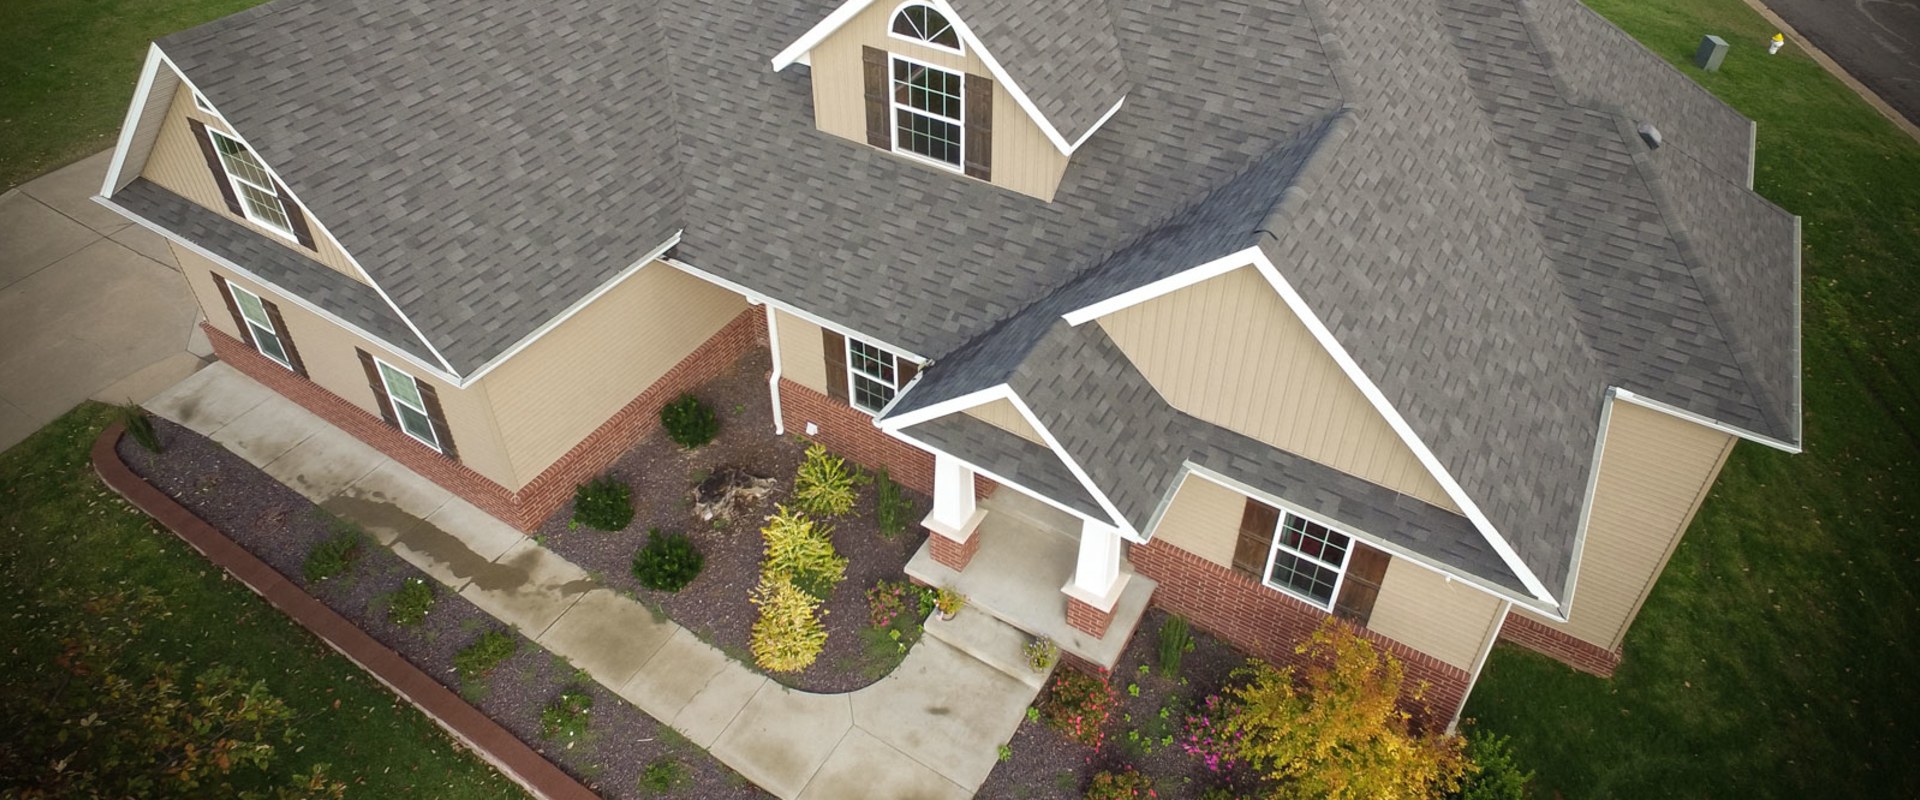 5 Things You Should Never Do to Your Roof